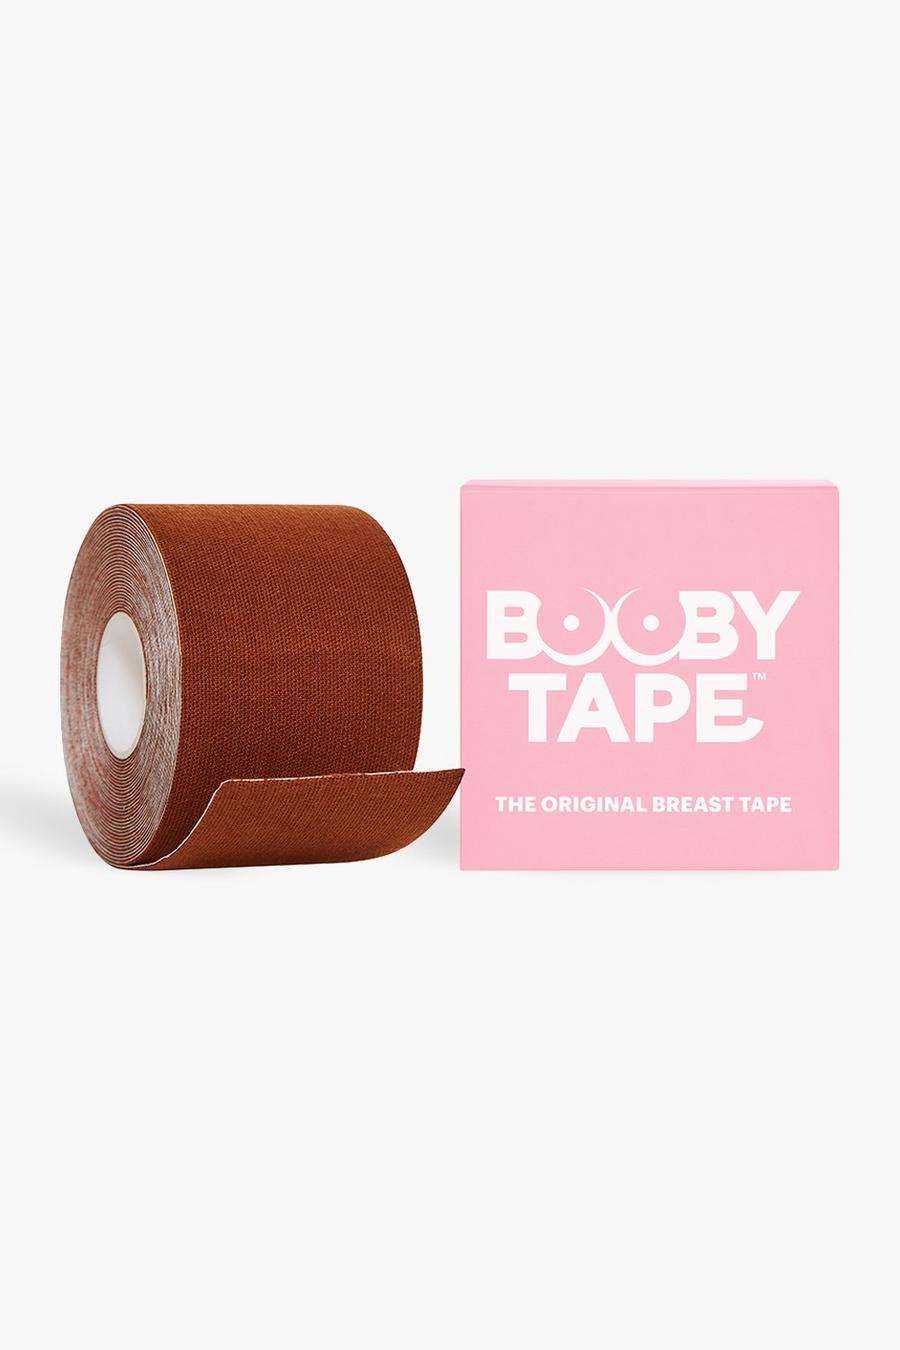 Booby Tape in Braun 5 m-Rolle